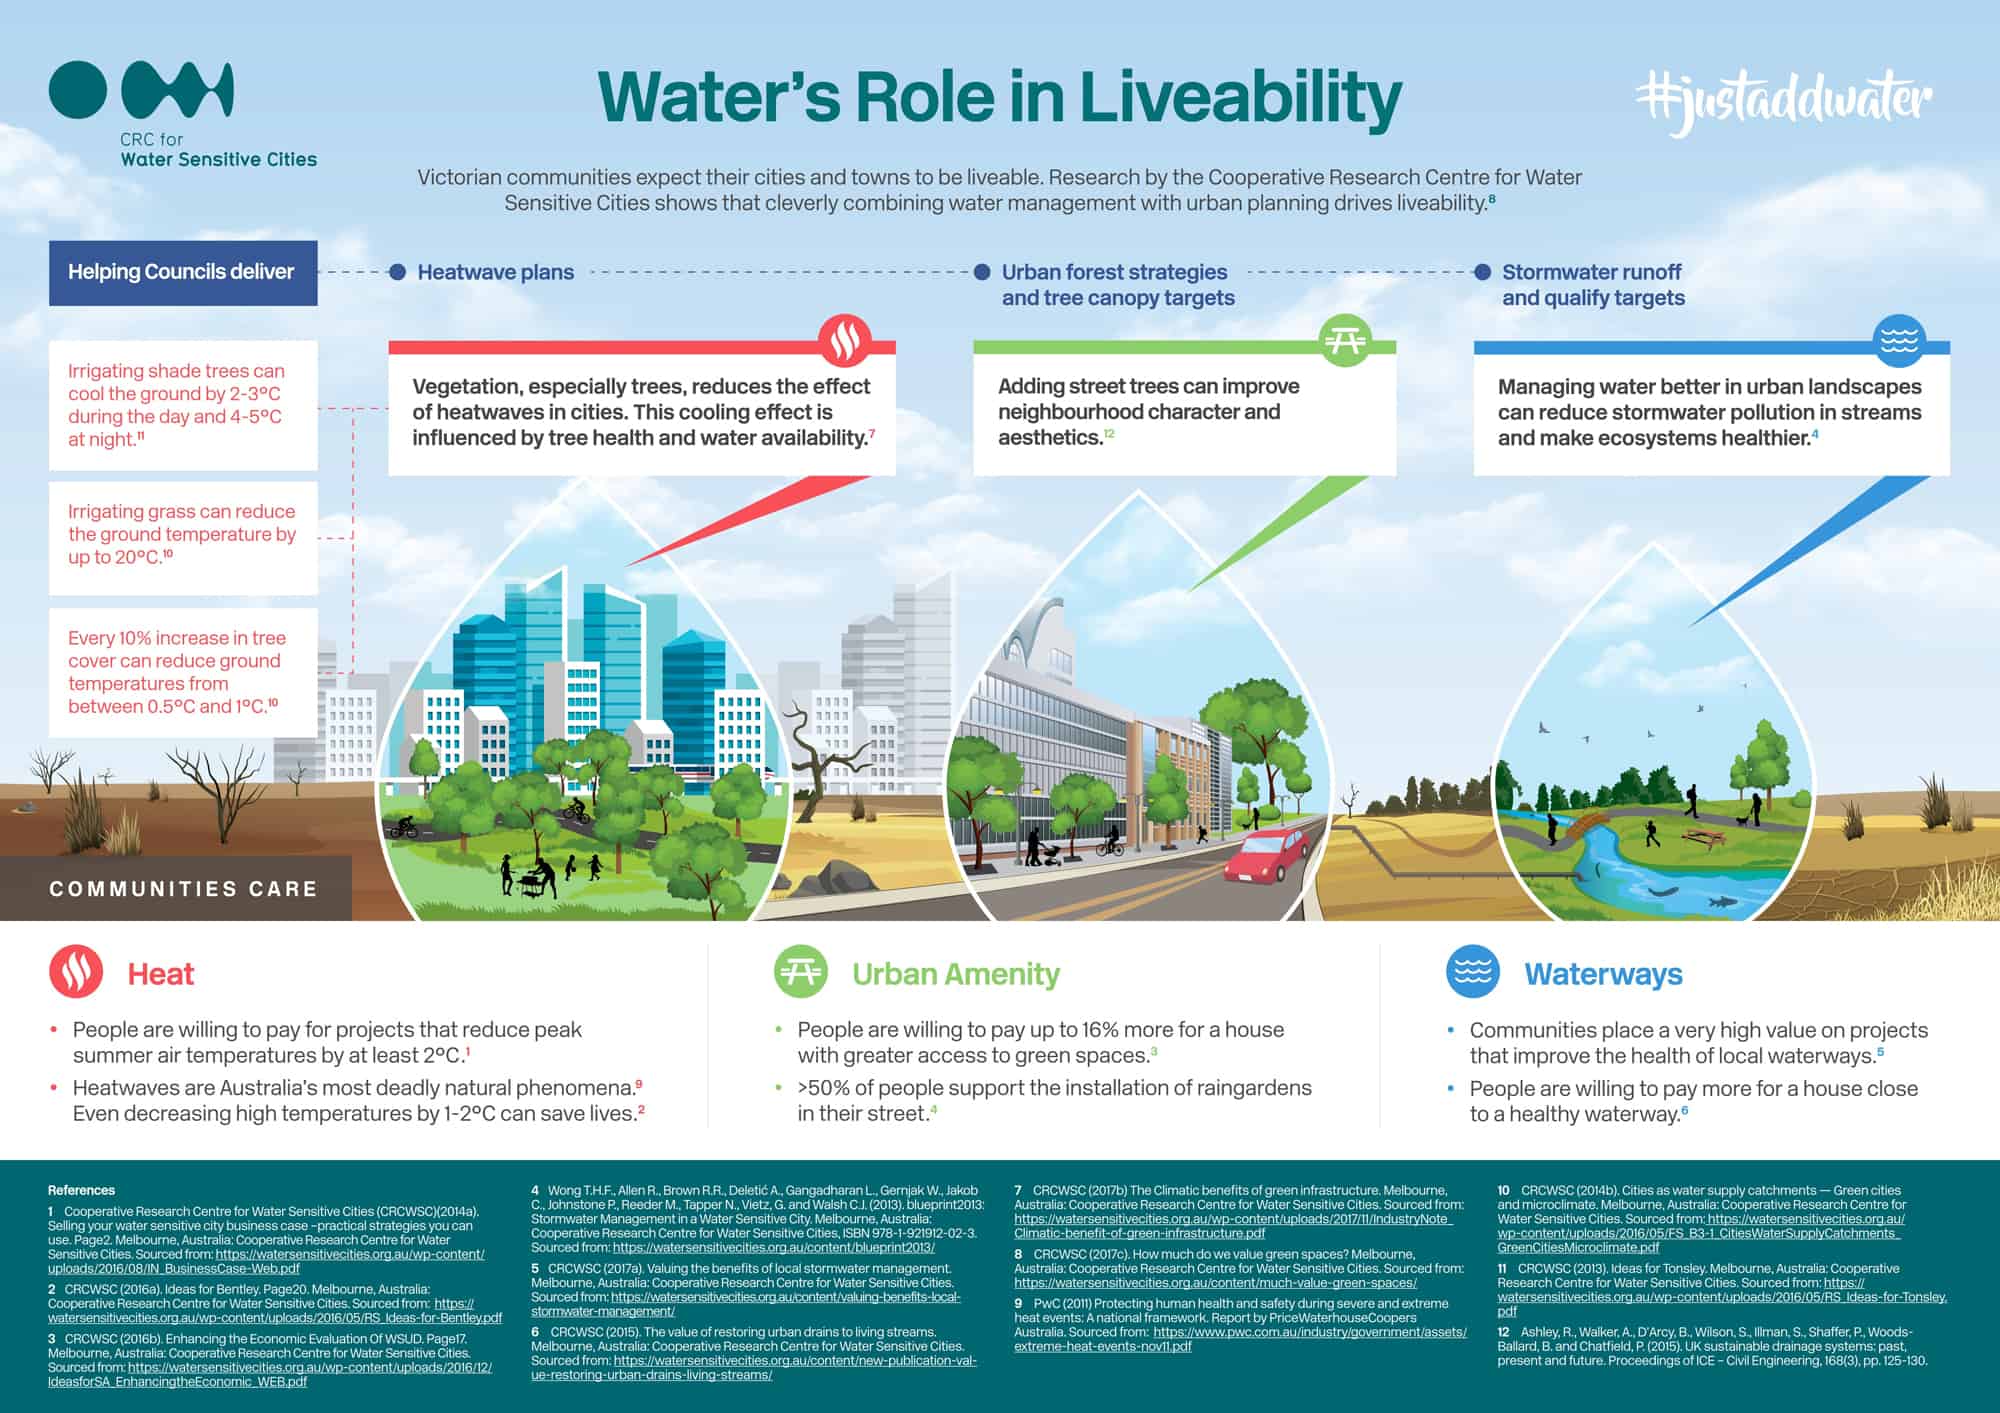 Examples of how water improves livability in the city